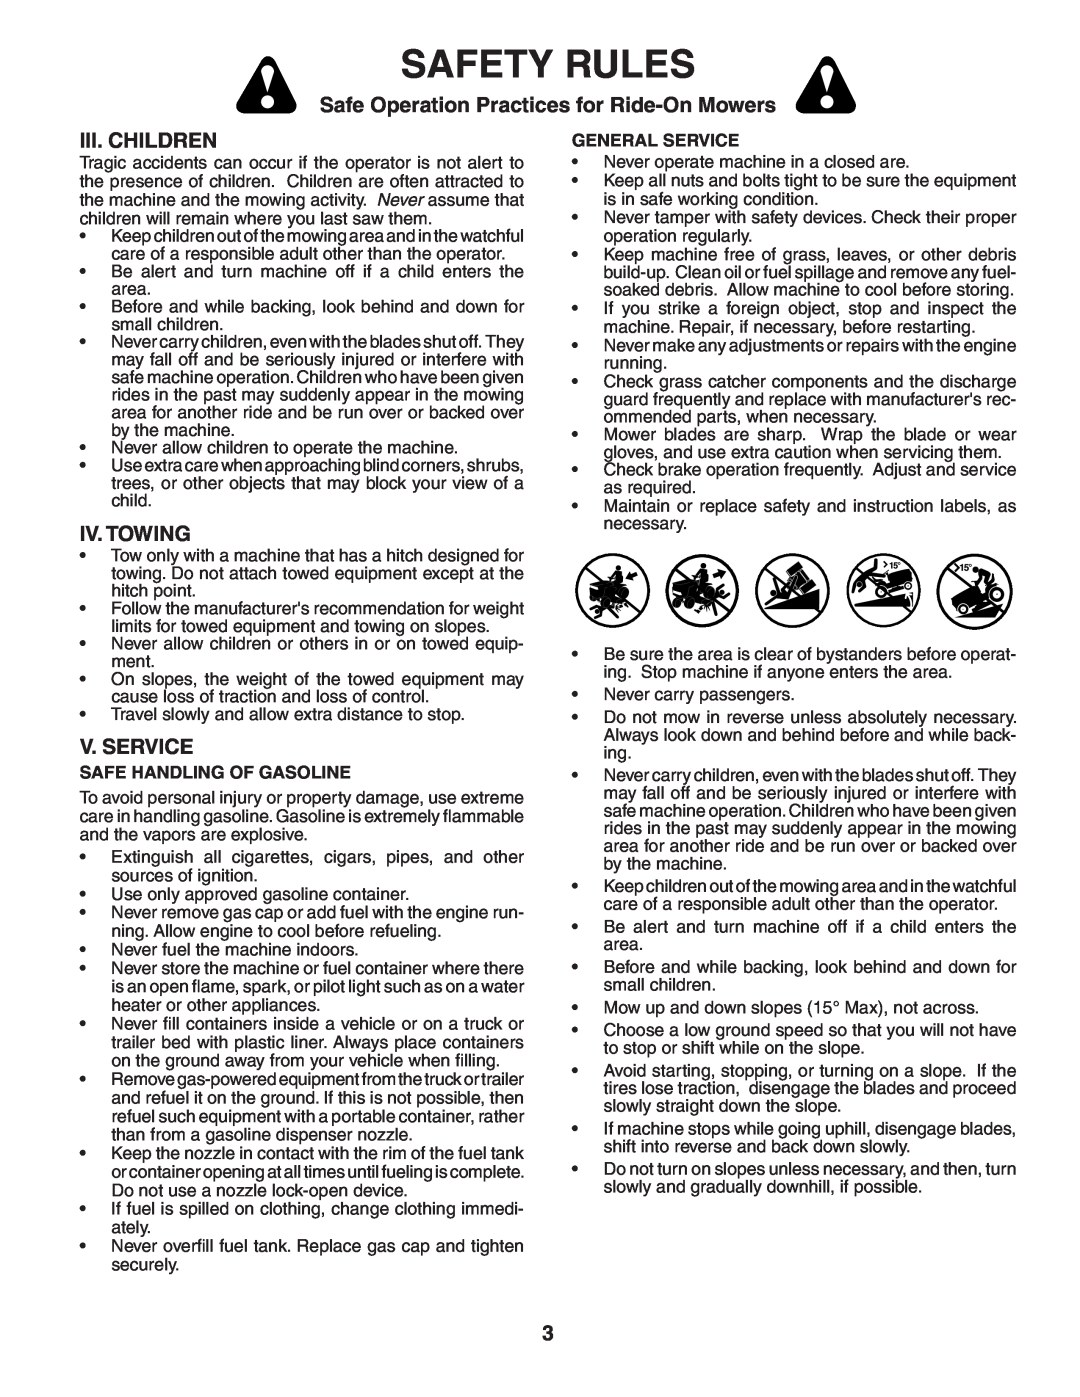 McCulloch 96011013201 Iii. Children, Iv. Towing, V. Service, Safety Rules, Safe Operation Practices for Ride-On Mowers 